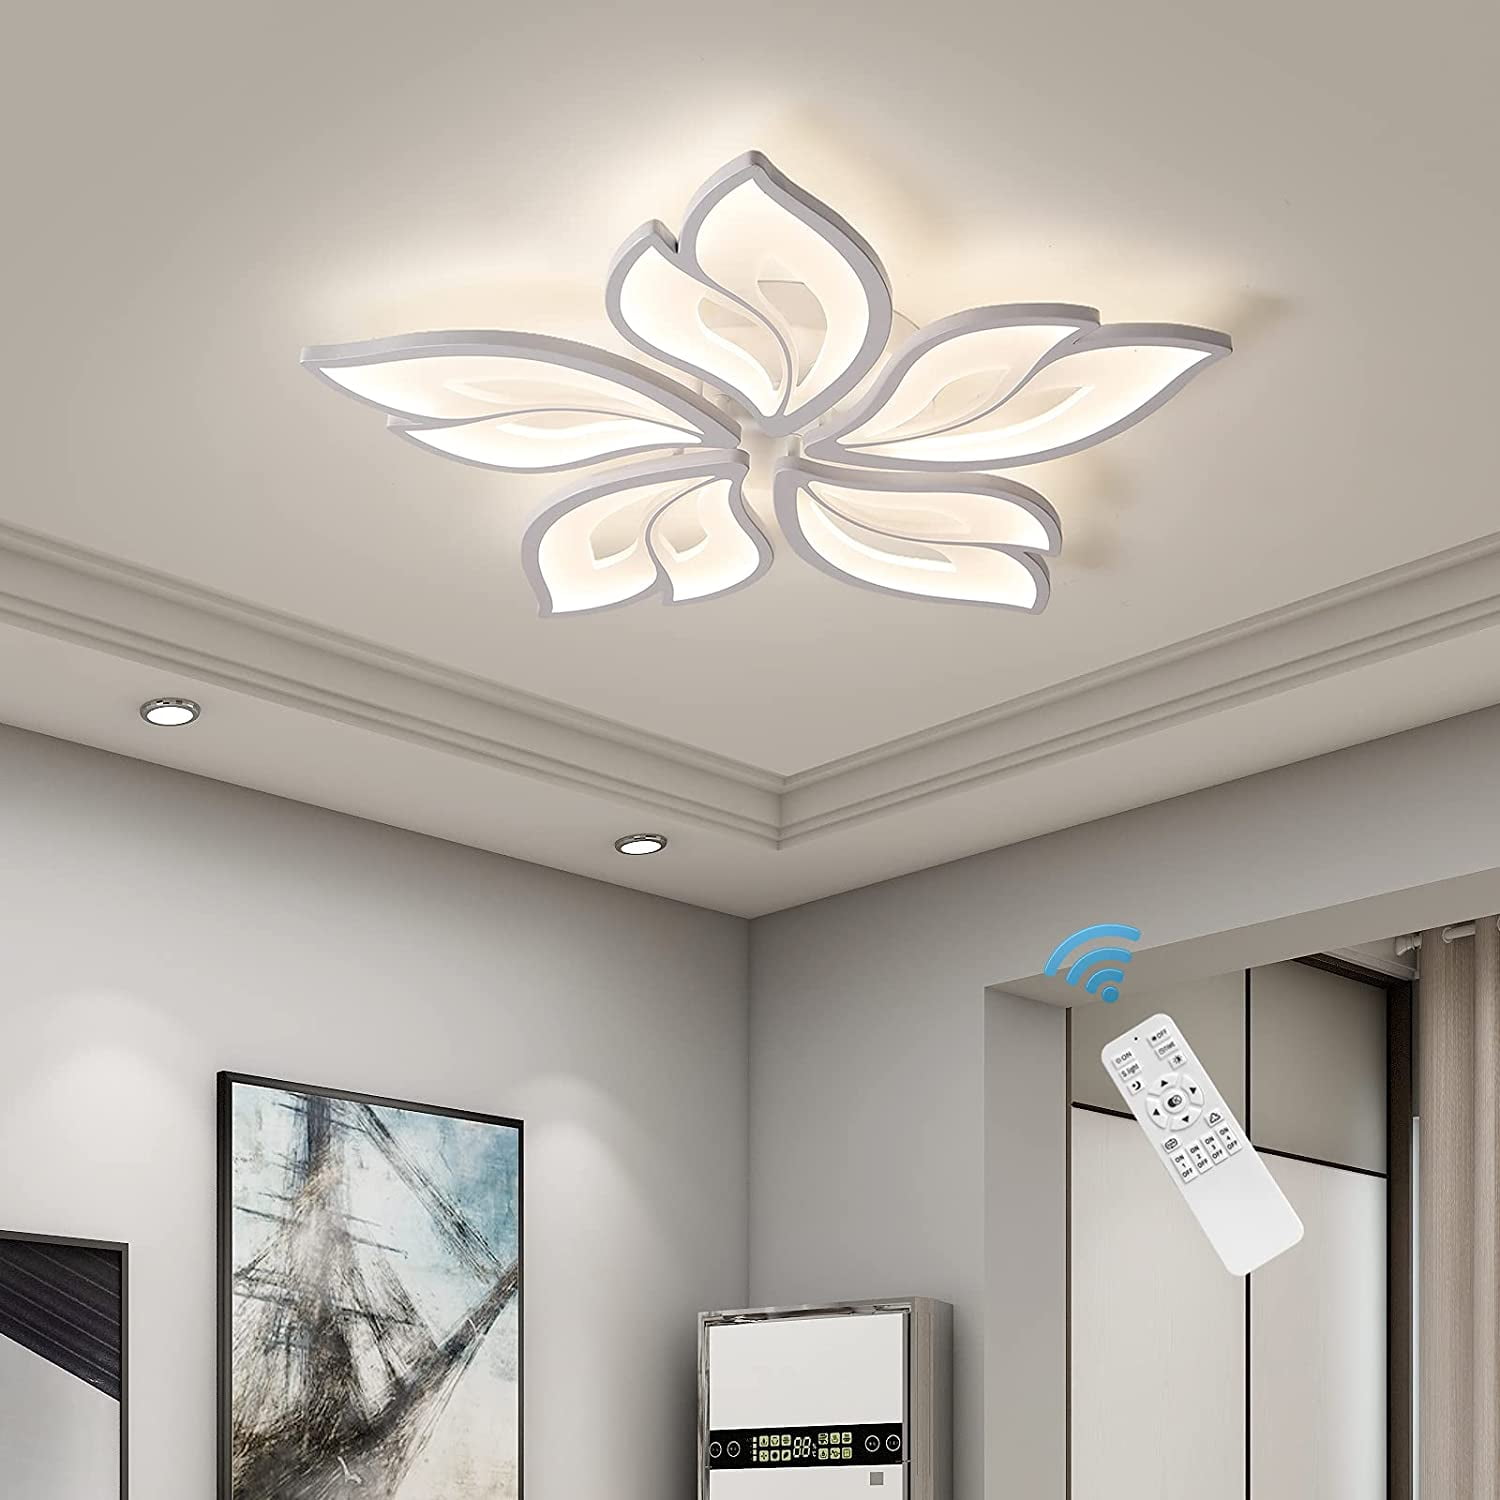 Garwarm 80W LED Modern Ceiling Light 3 Heads Squares Dimmable Ceiling Lamp Fixture with Remote Control Chic Flush Mount Acrylic Ceiling Chandelier Lighting for Living Room Bedroom Gold 